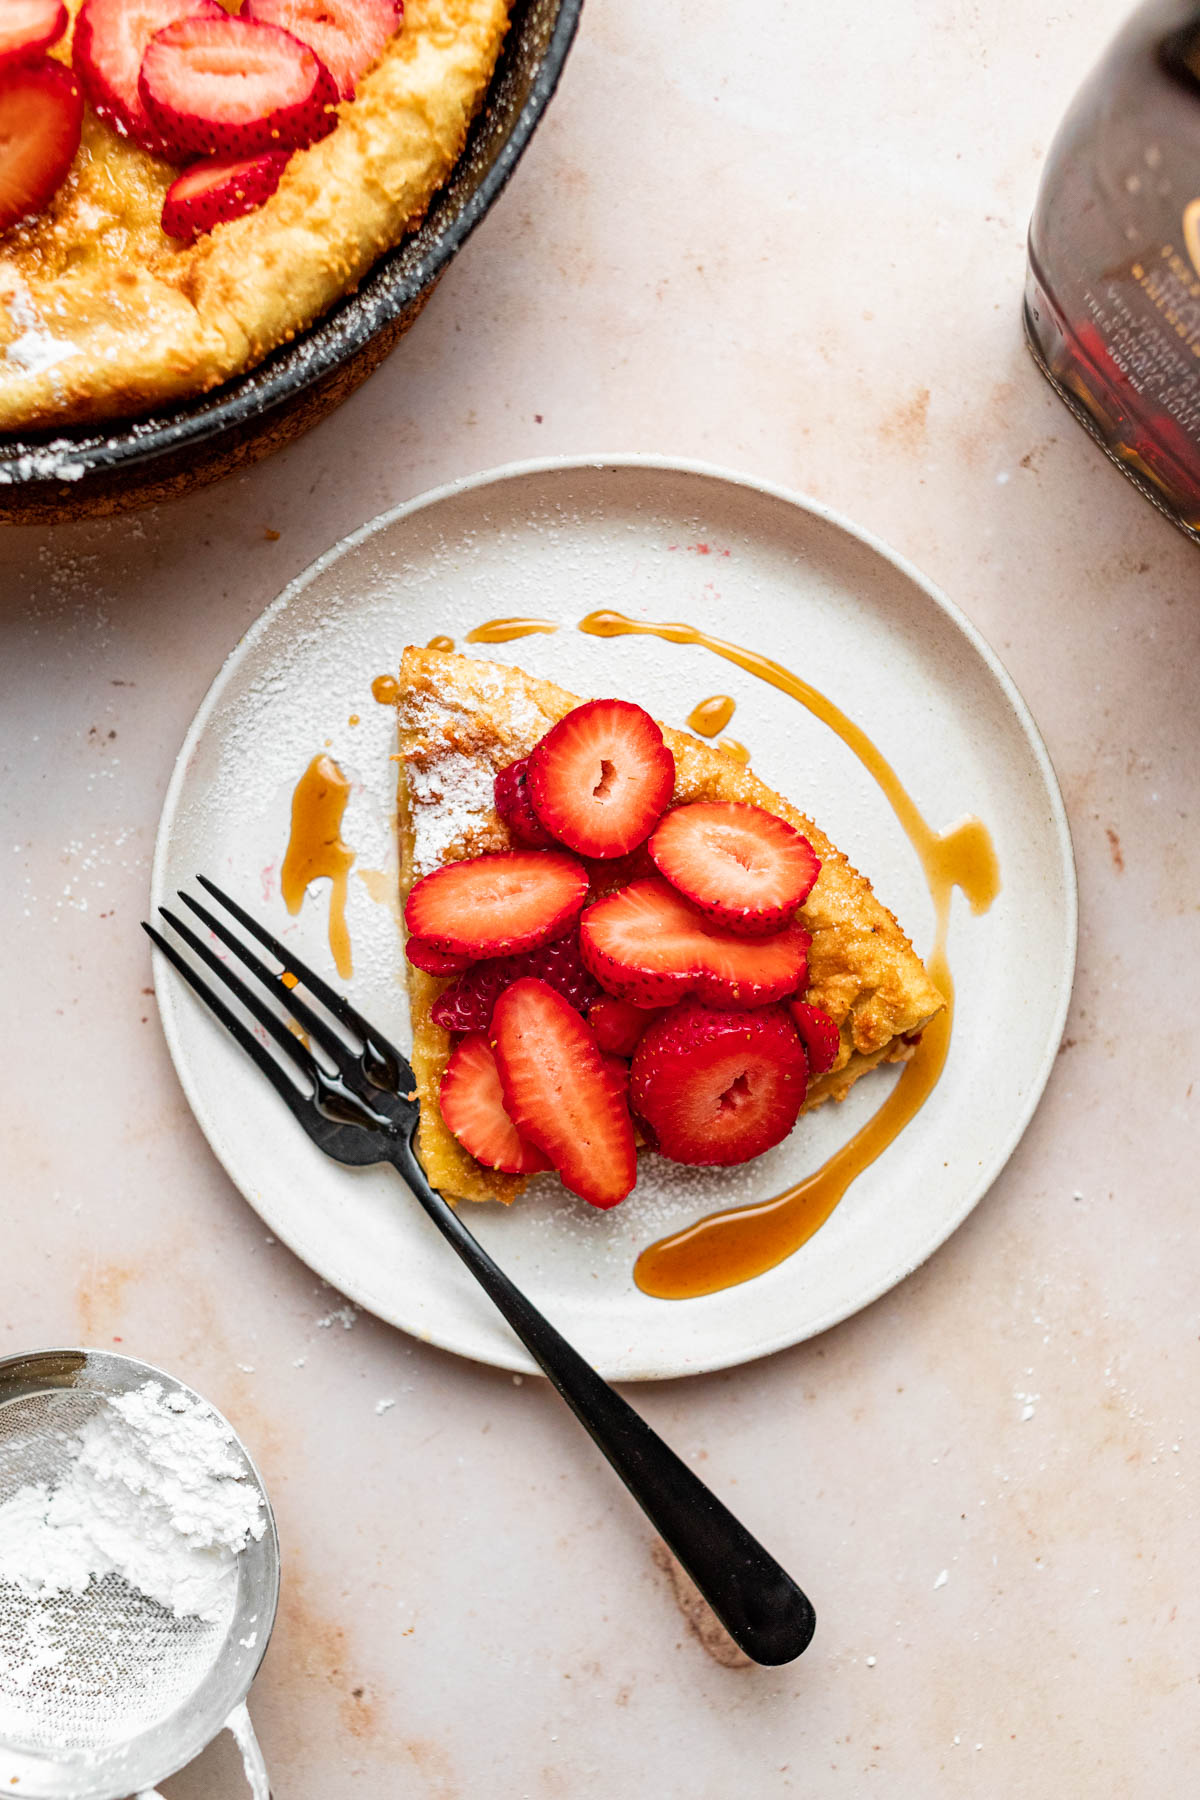 A slice of gluten-free Dutch Baby on a plate.